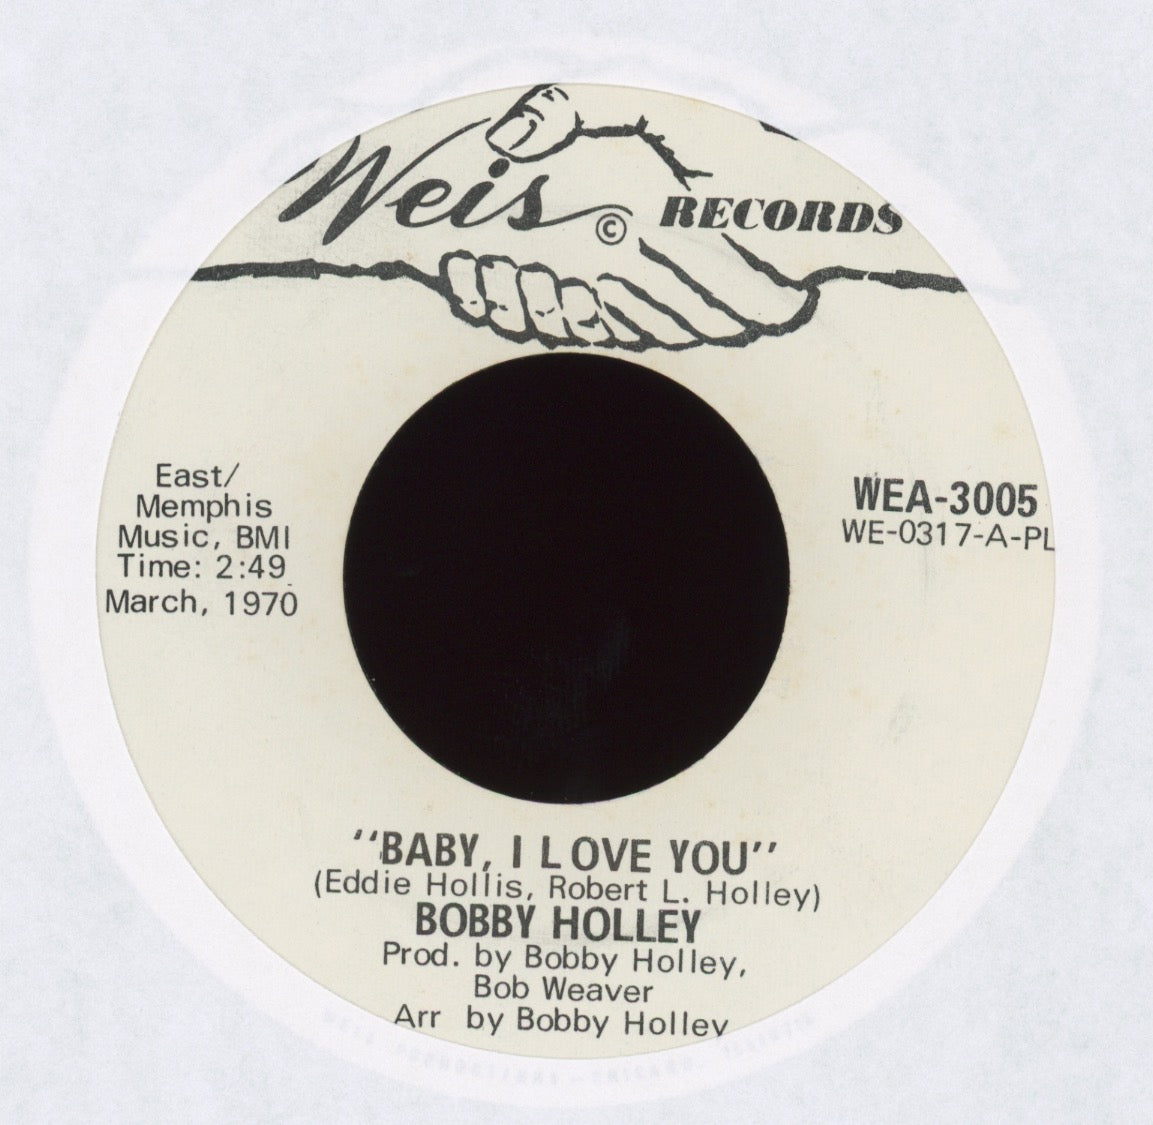 Bobby Holley - Moving Dancer / Baby, I Love You on Weis Promo